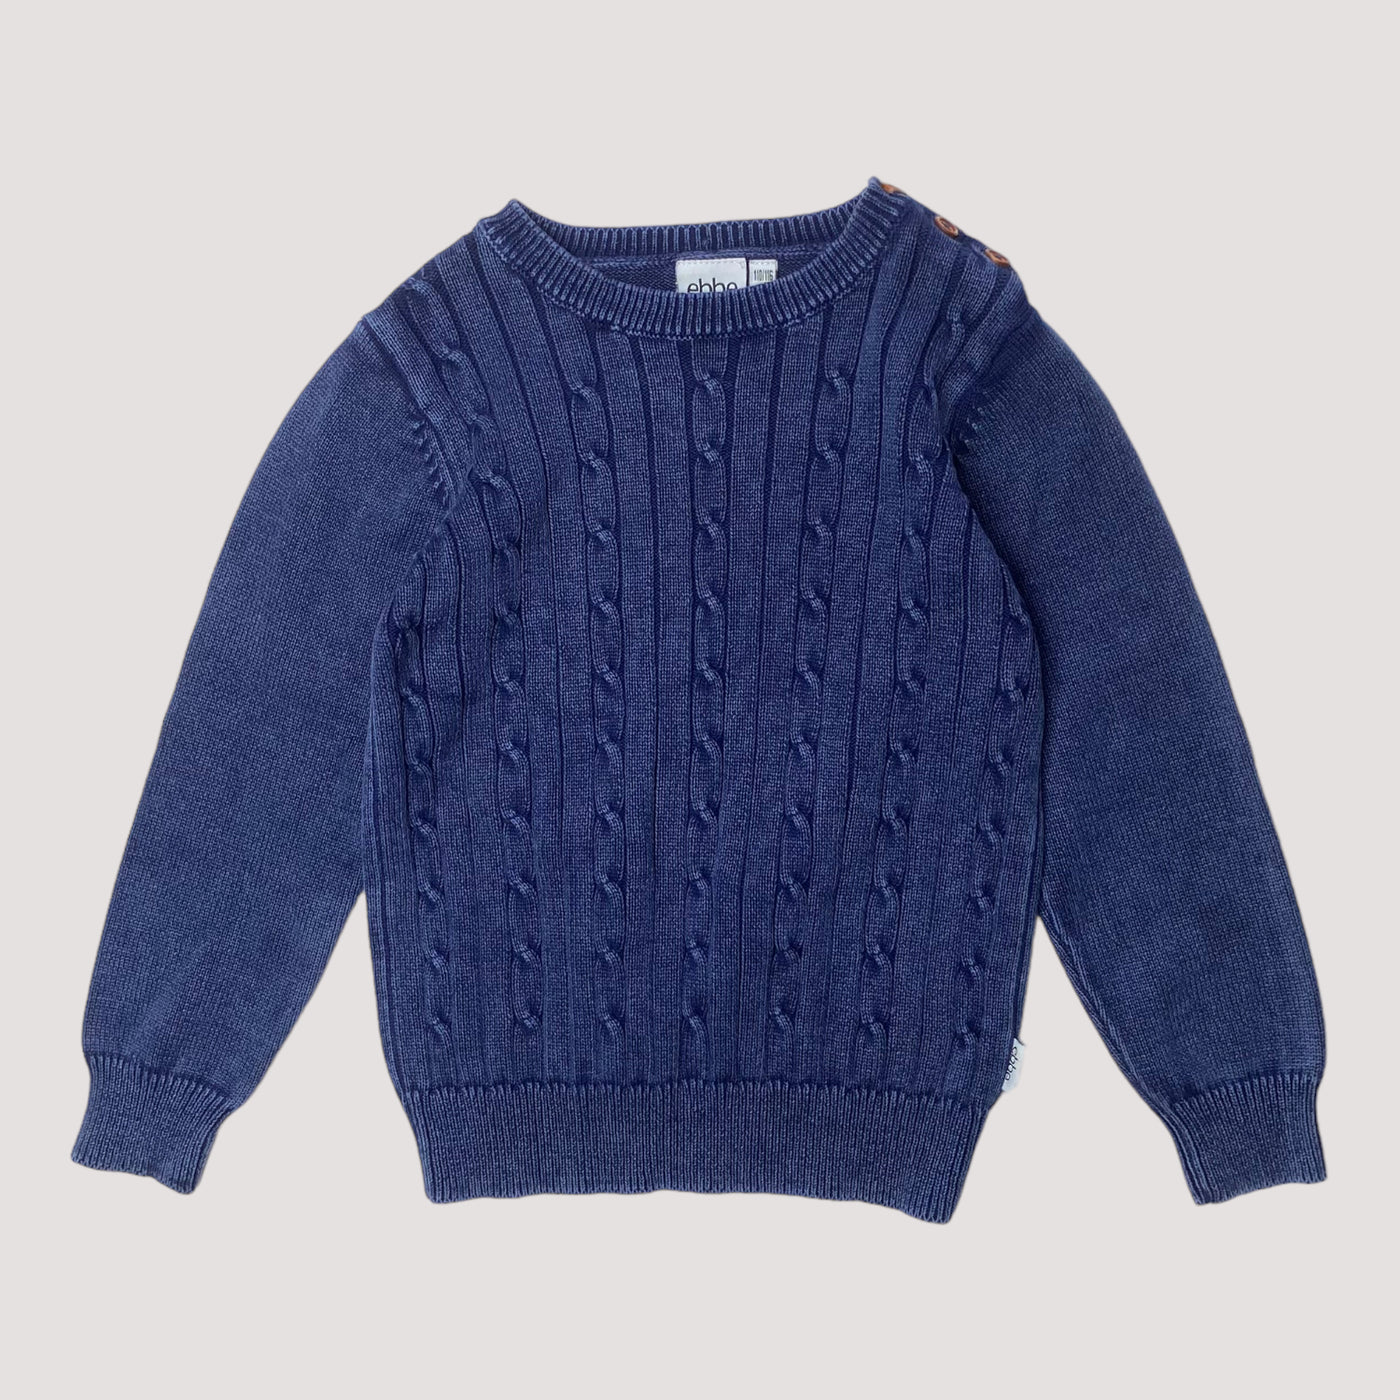 Ebbe cable knit sweater, midnight blue | 110/116cm